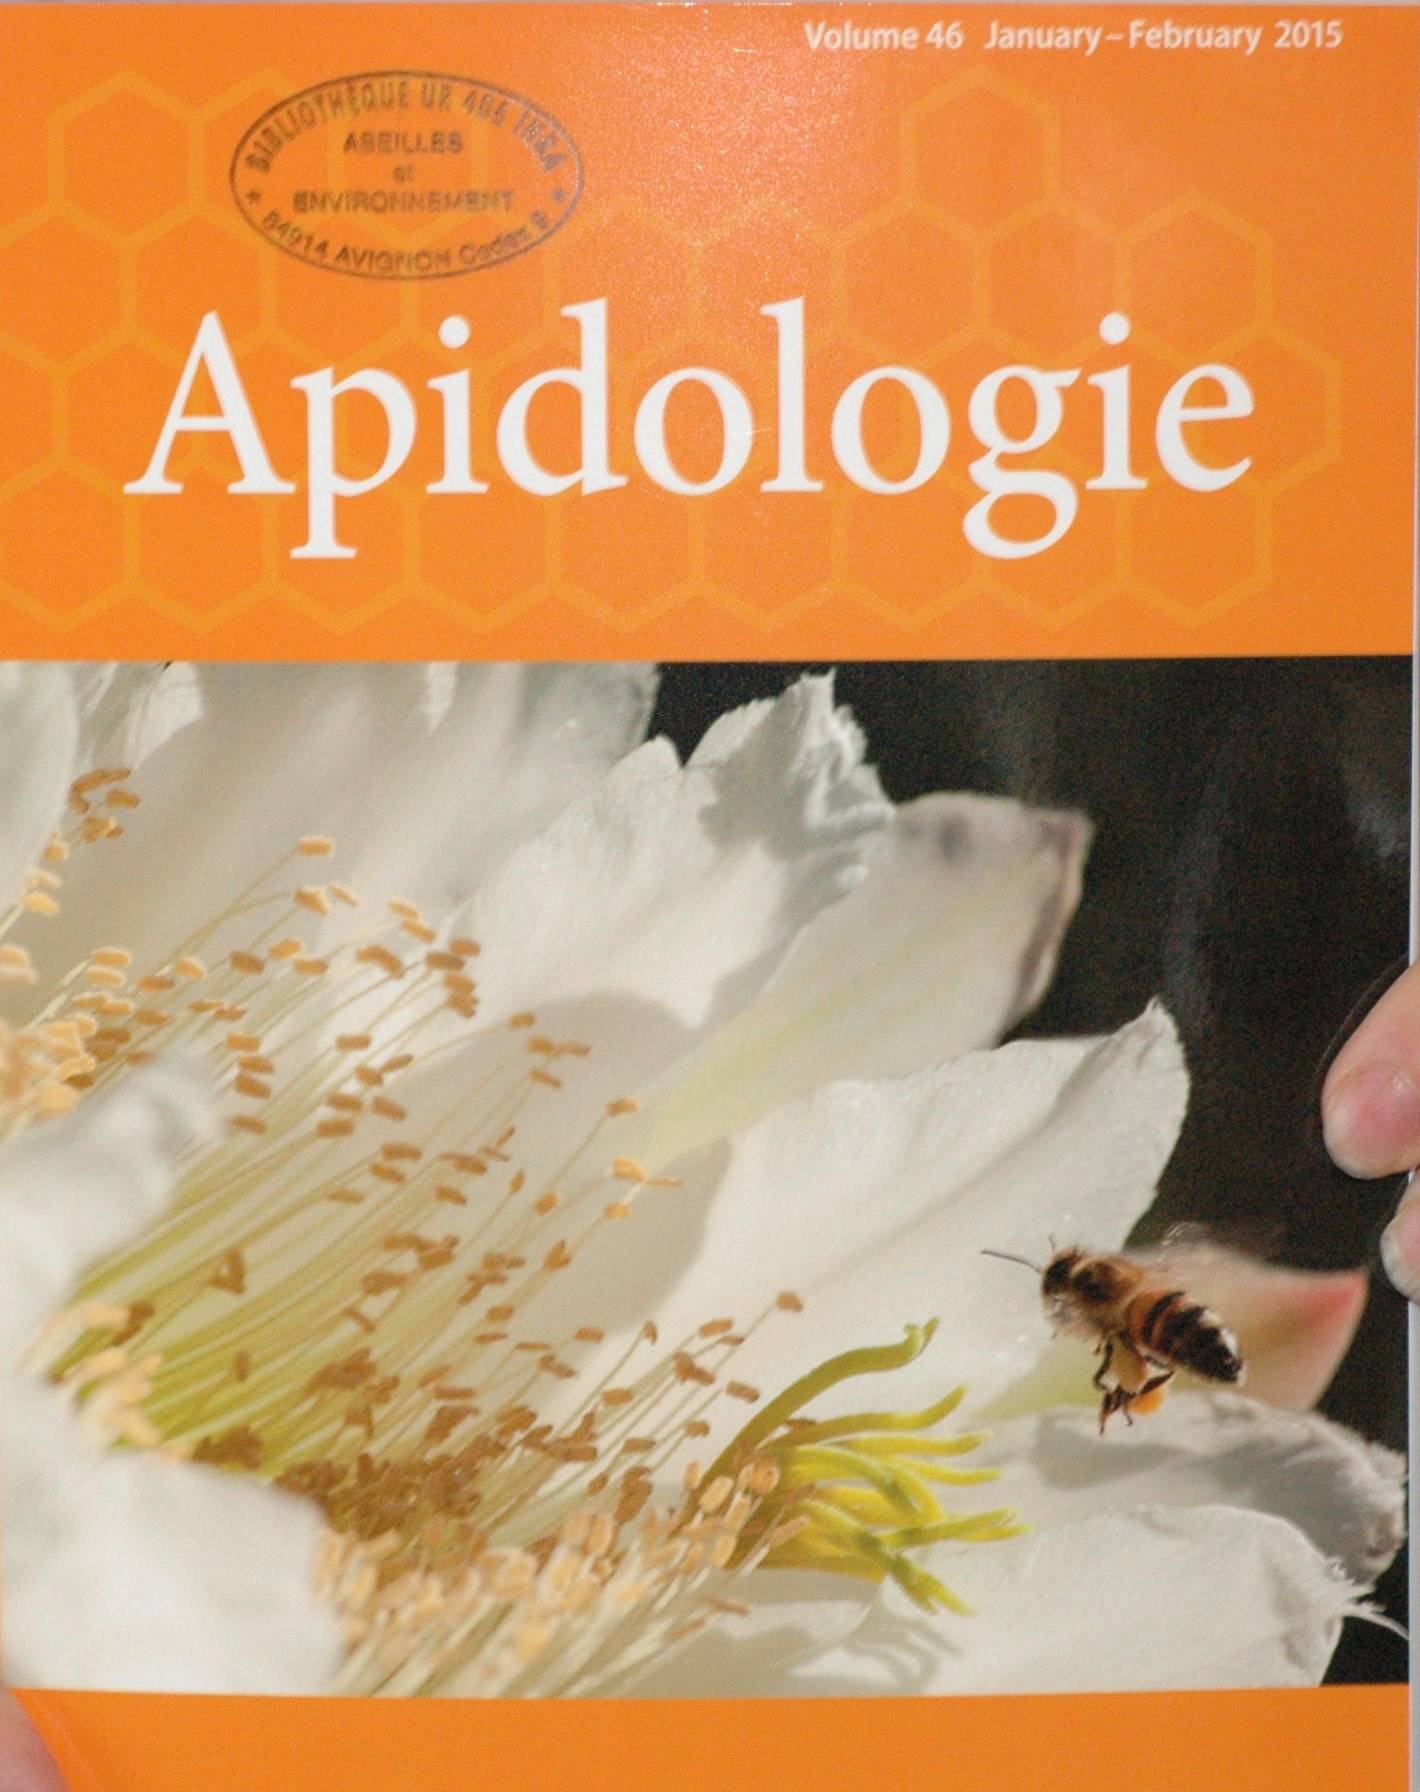 Apidology review